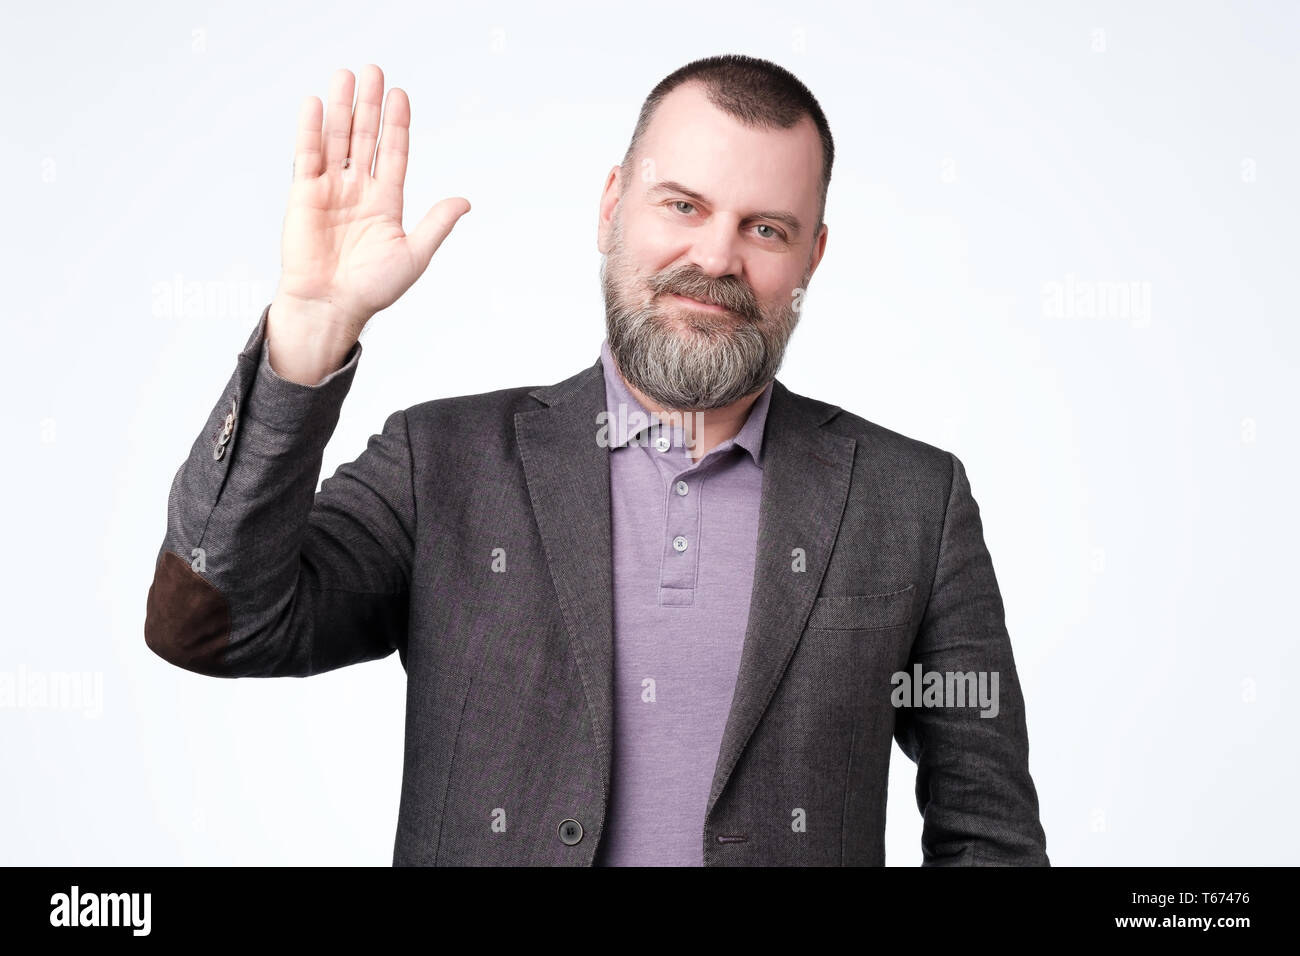 Mature man in jacket wave hand welcome. Stock Photo